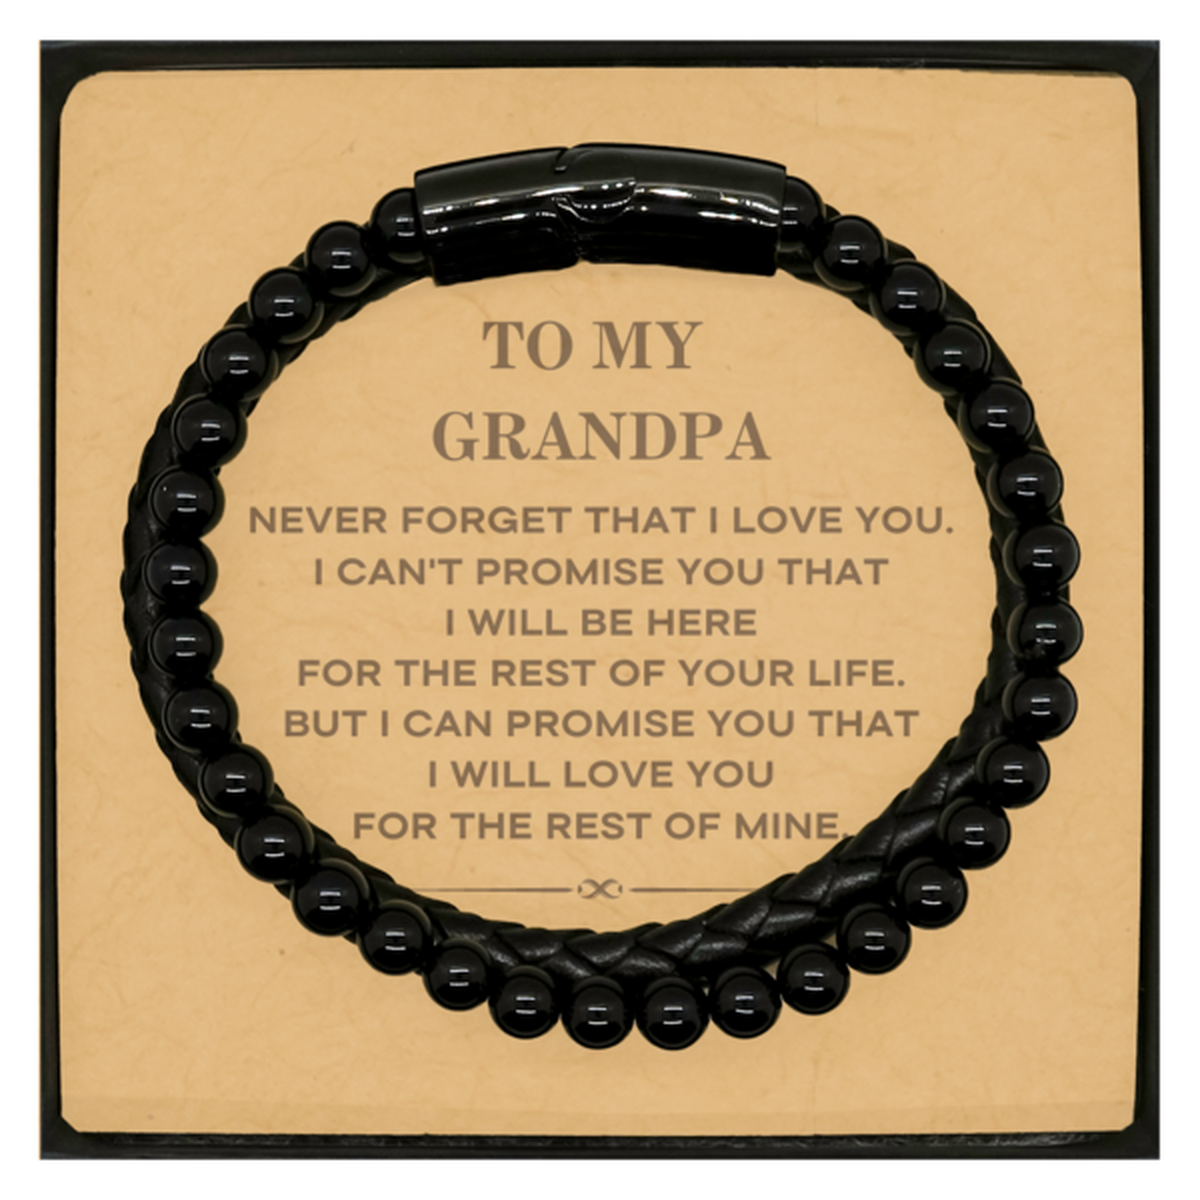 To My Grandpa Gifts, I will love you for the rest of mine, Love Grandpa Bracelet, Birthday Christmas Unique Stone Leather Bracelets For Grandpa